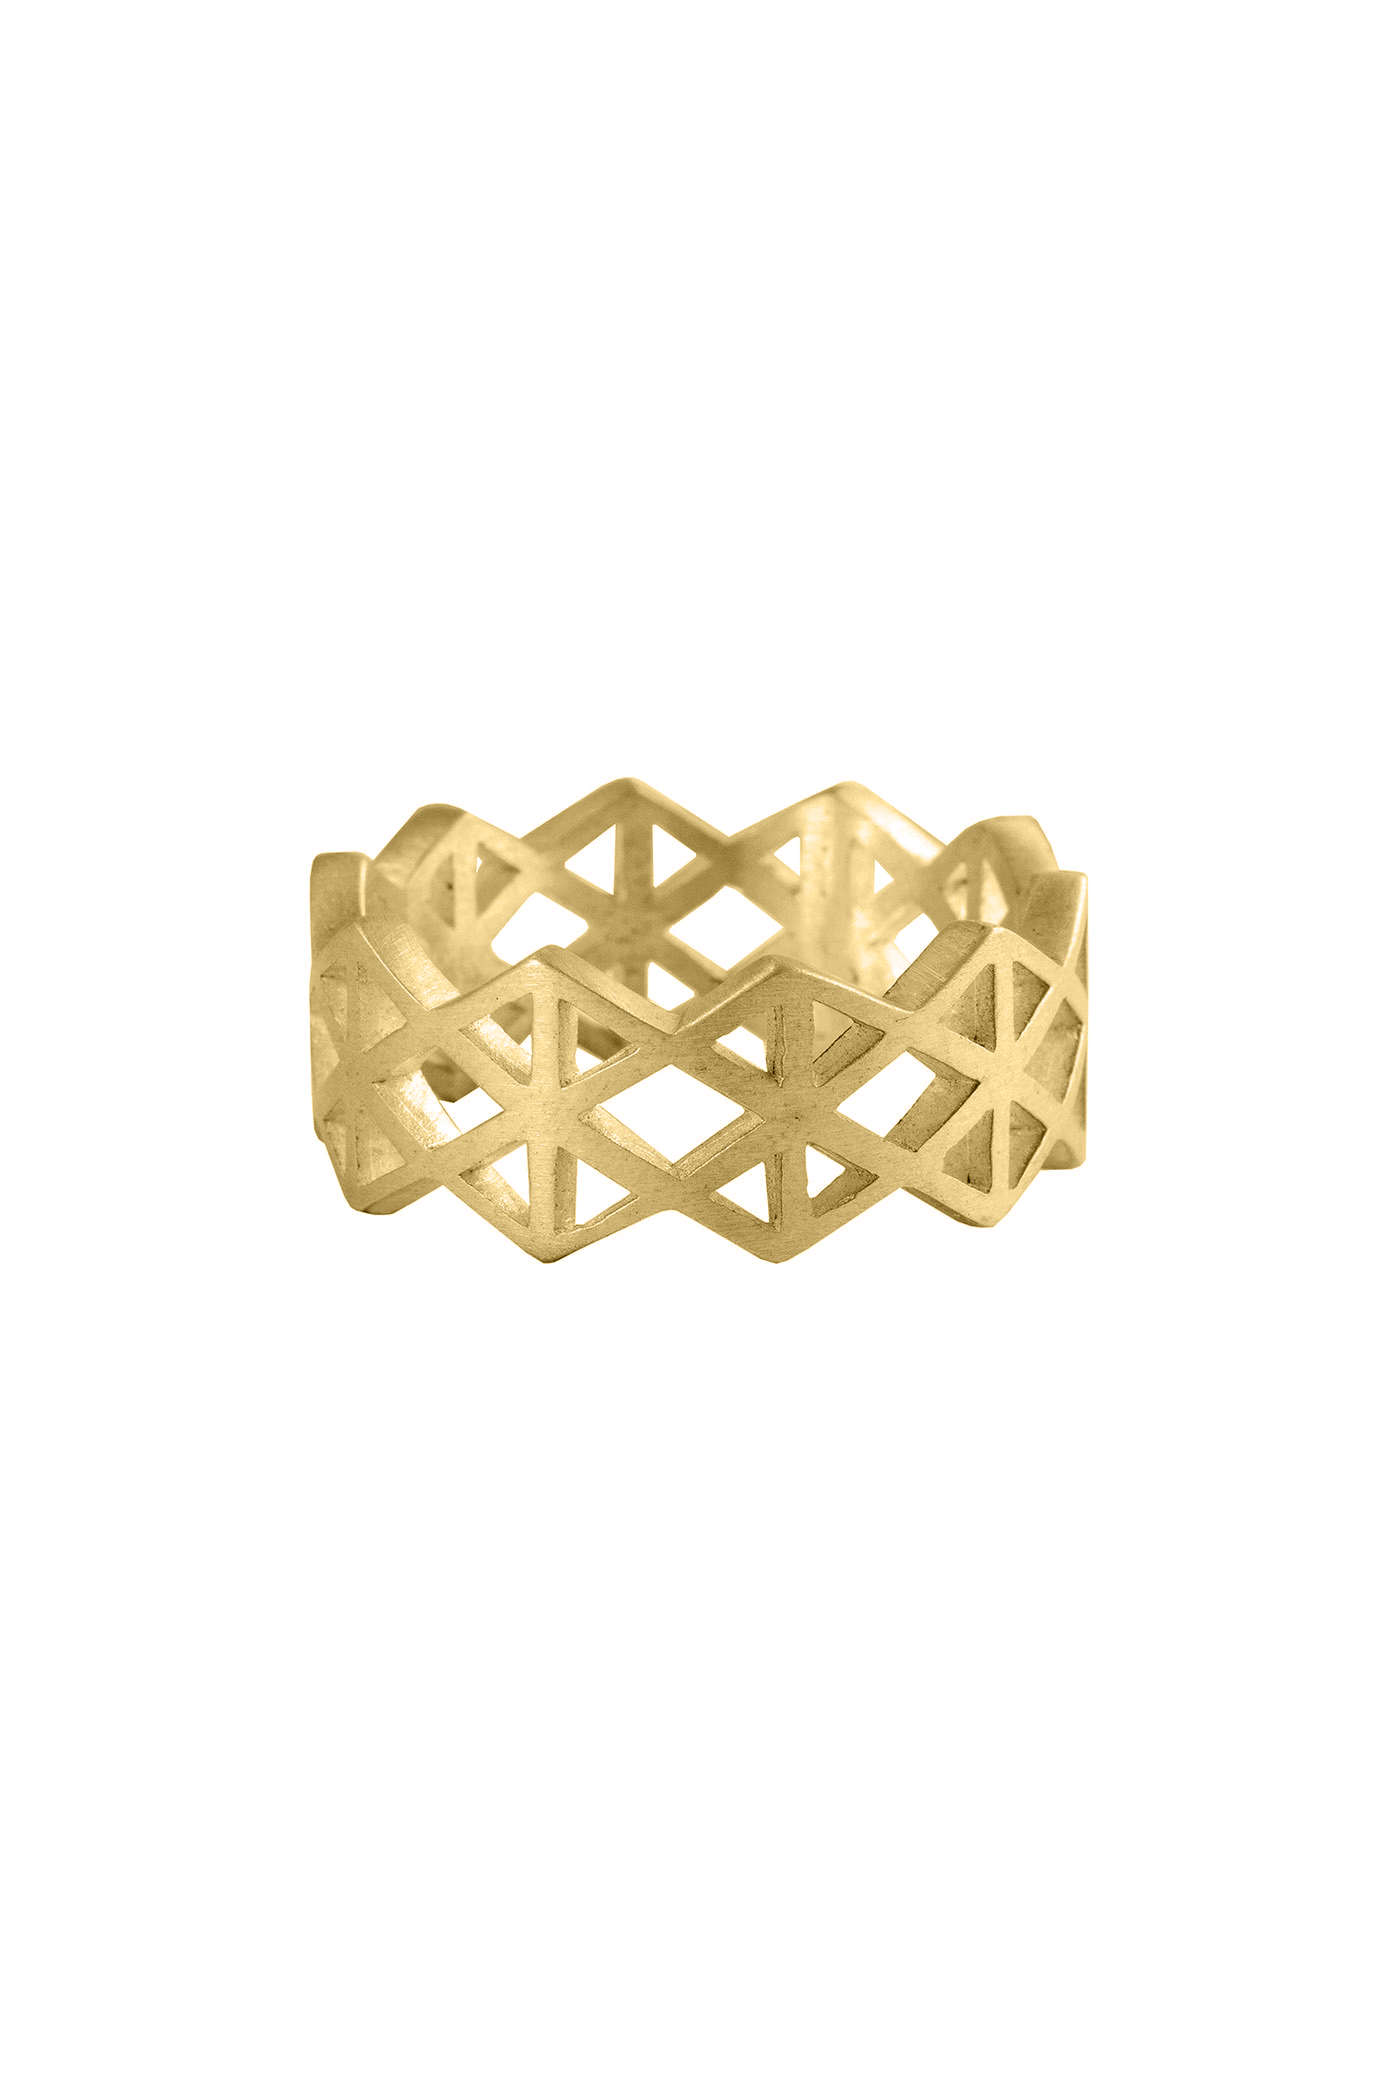 Solid gold Life force ring